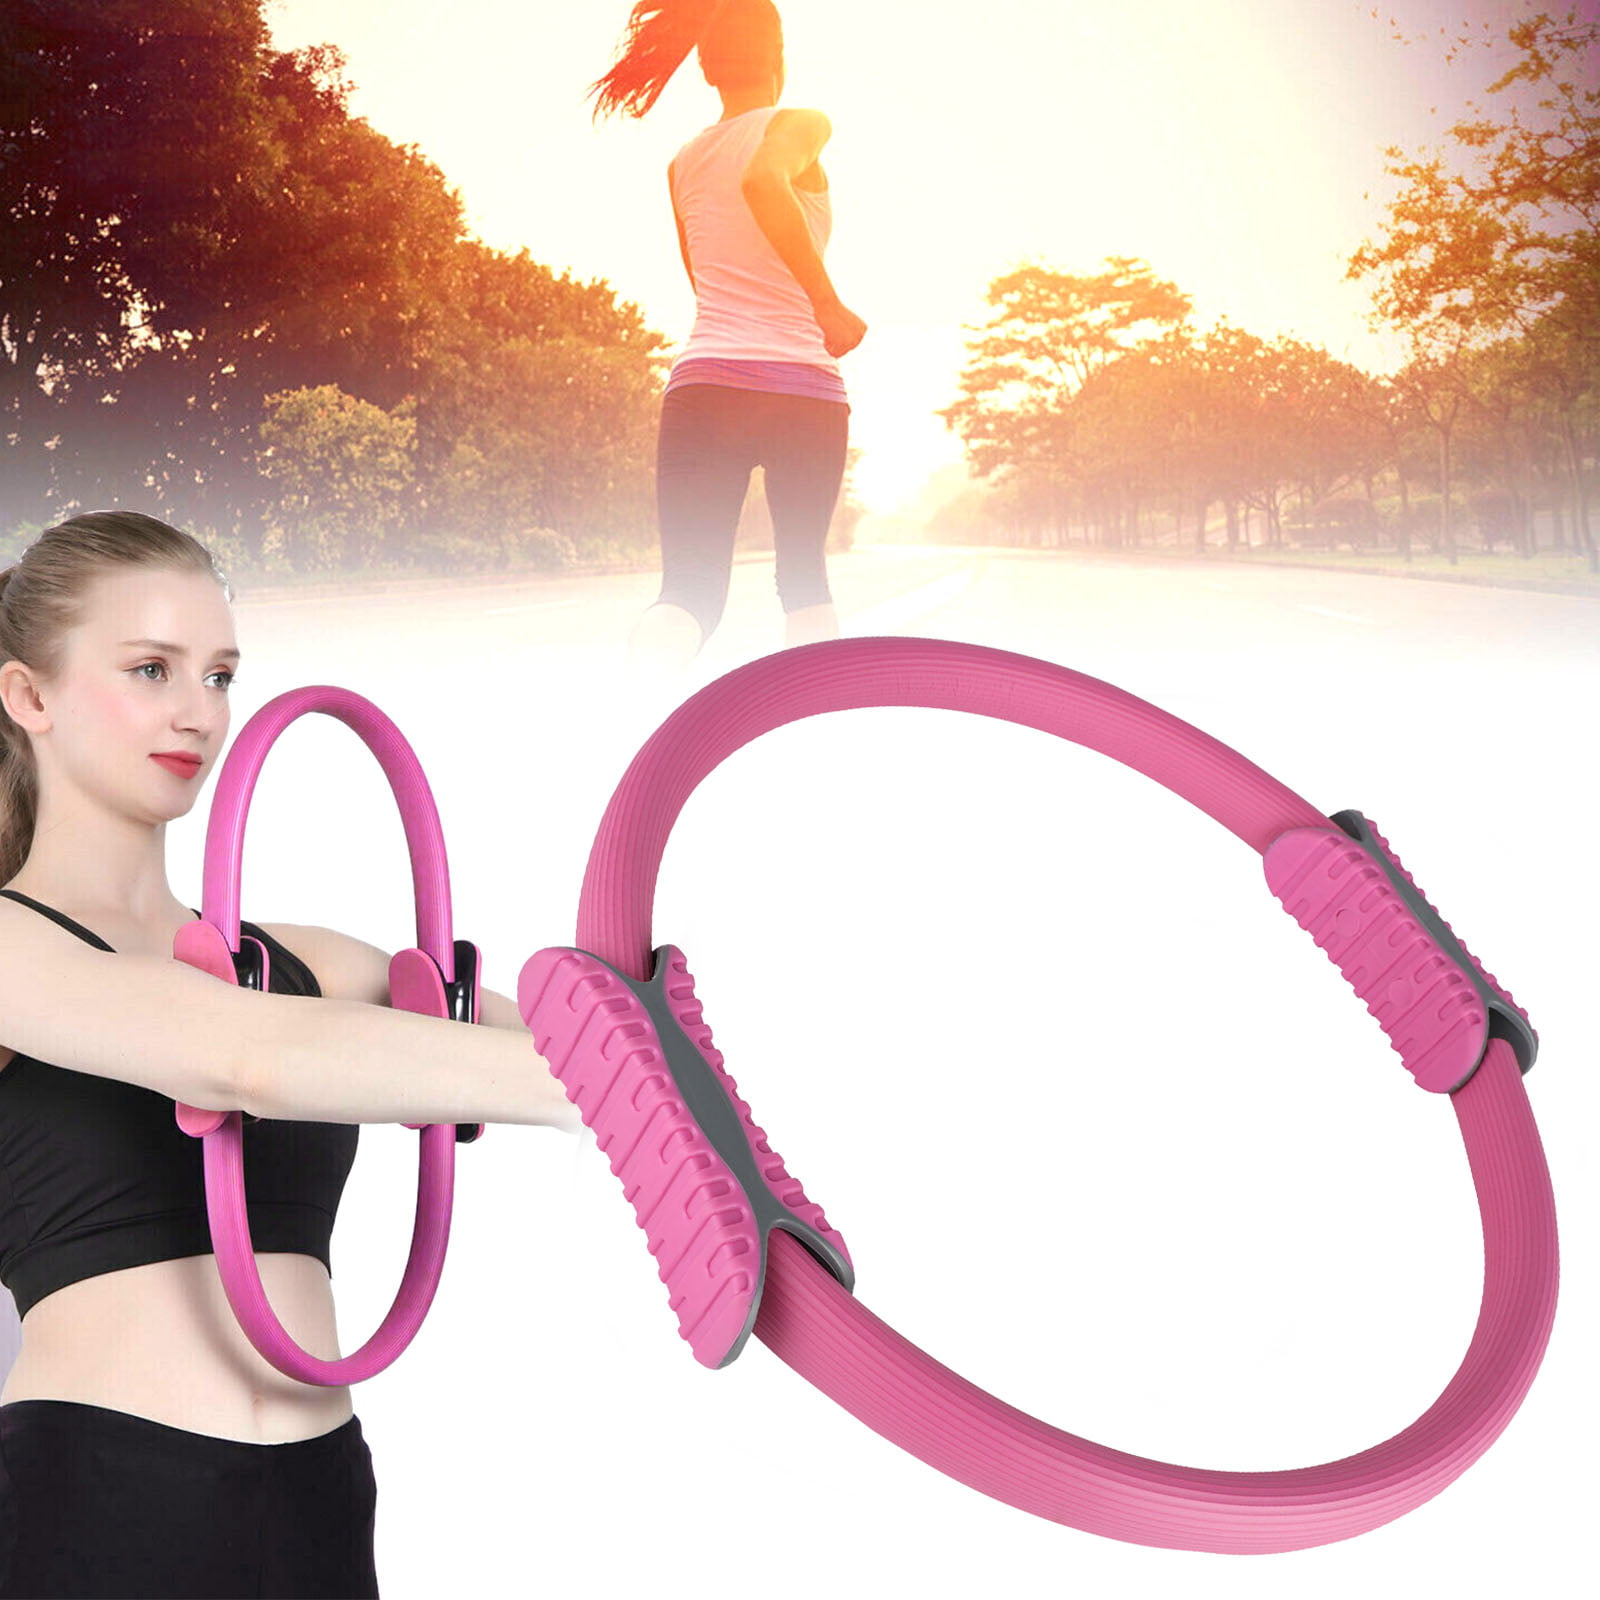 redder Pilates Ring Fitness Circle Weight Loss Body Training Circle and Resistance Exercise Fitness Ring 15 inch